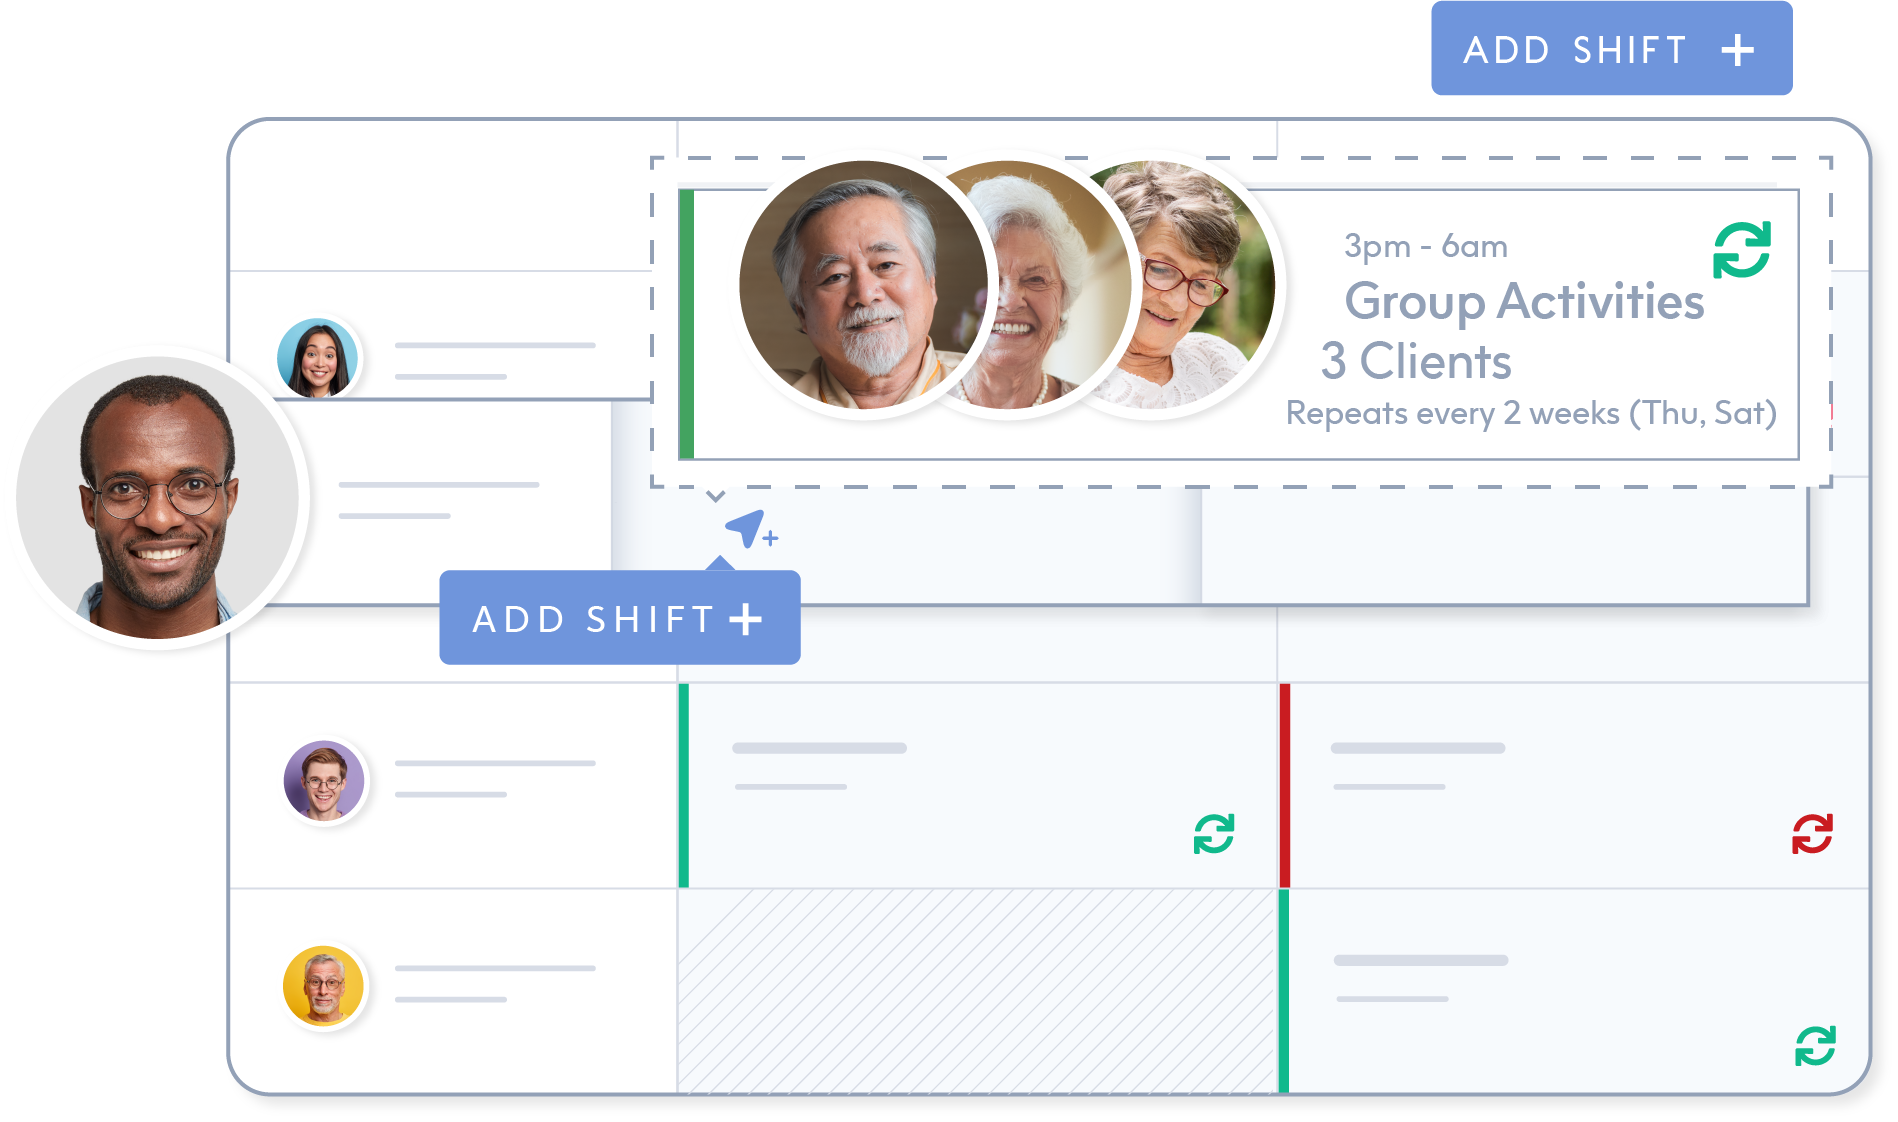 Assigning shifts for multiple aged care clients to a worker using ShiftCare's rostering function